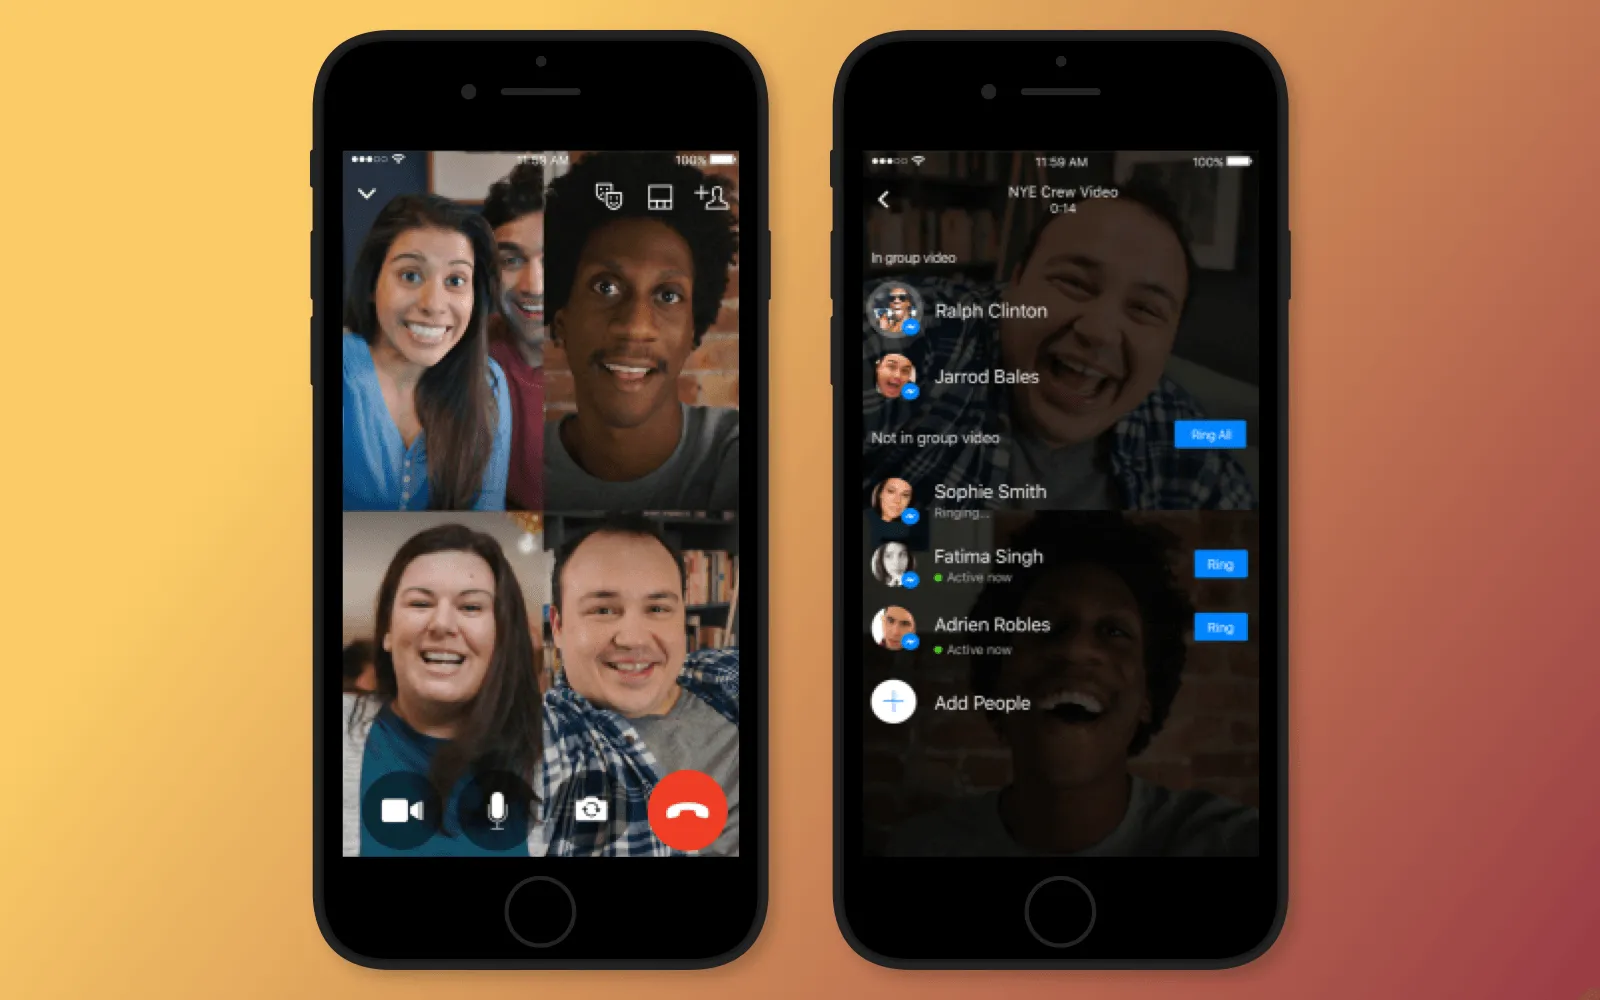 Example of group video calls on Facebook Messenger